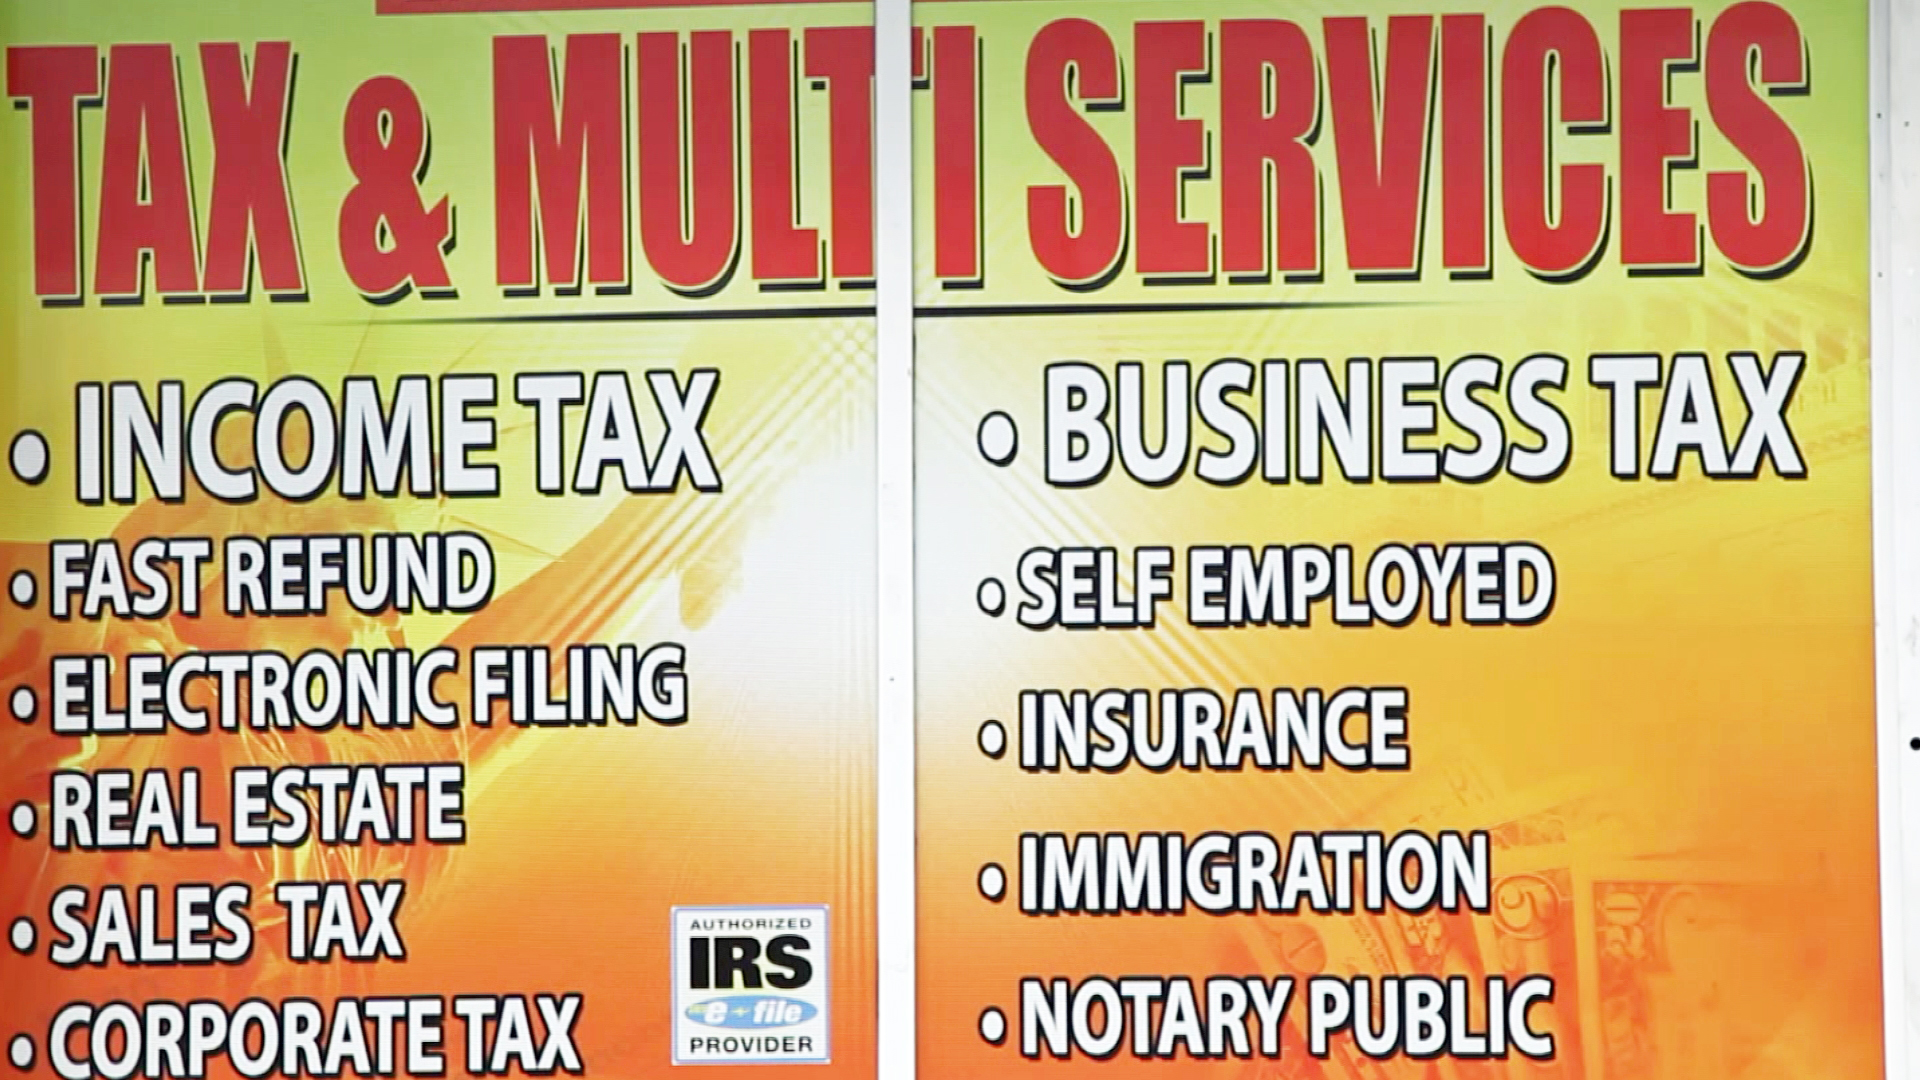 What key adjustments did the IRS make to tax deductions for 2014?